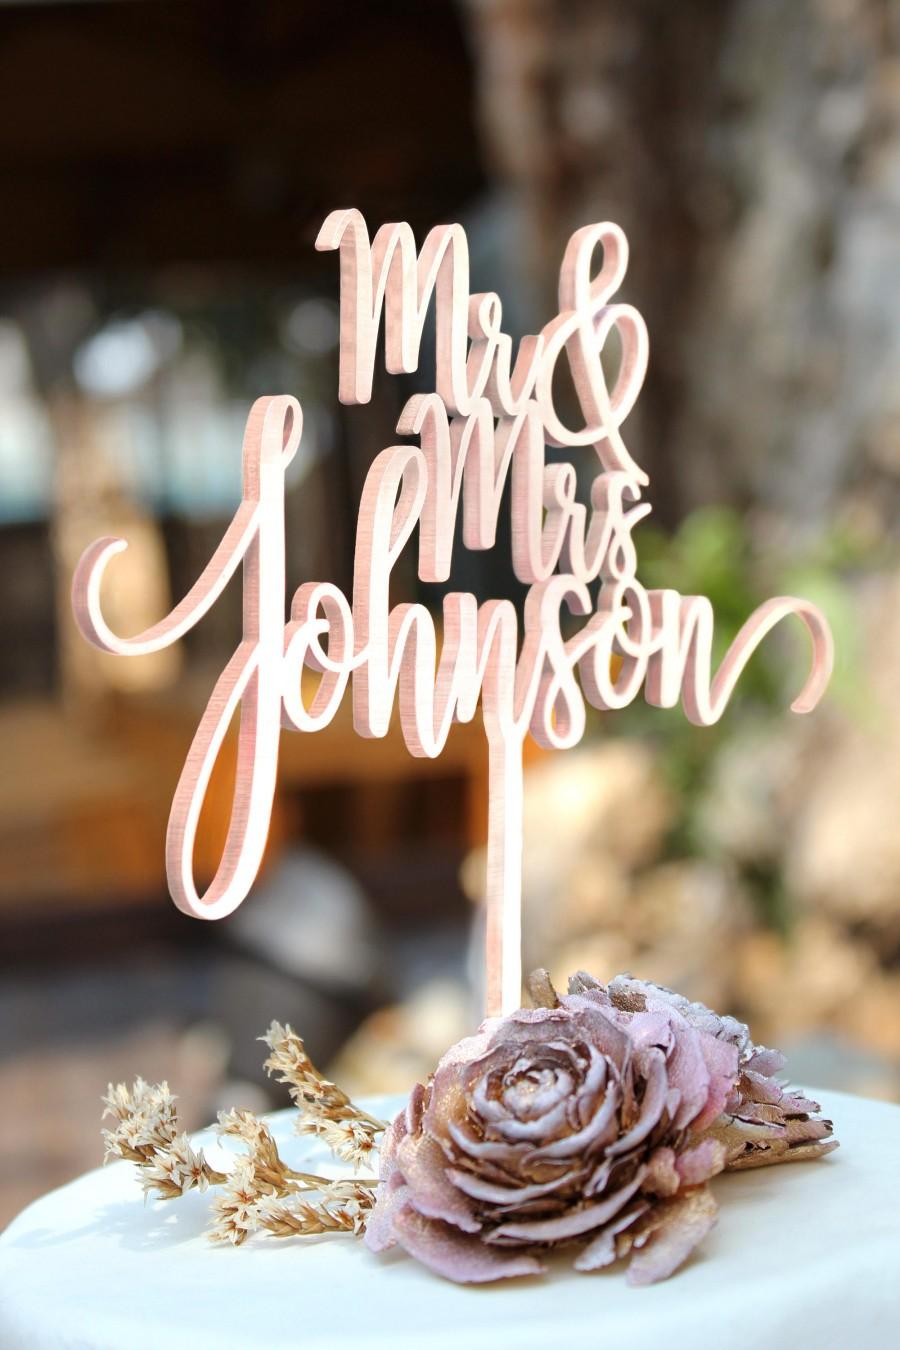 Hochzeit - Personalized Cake Topper for Wedding, Custom Personalized Wedding Cake Topper, Customized Wedding Cake Topper, Mr and Mrs Cake Topper 29